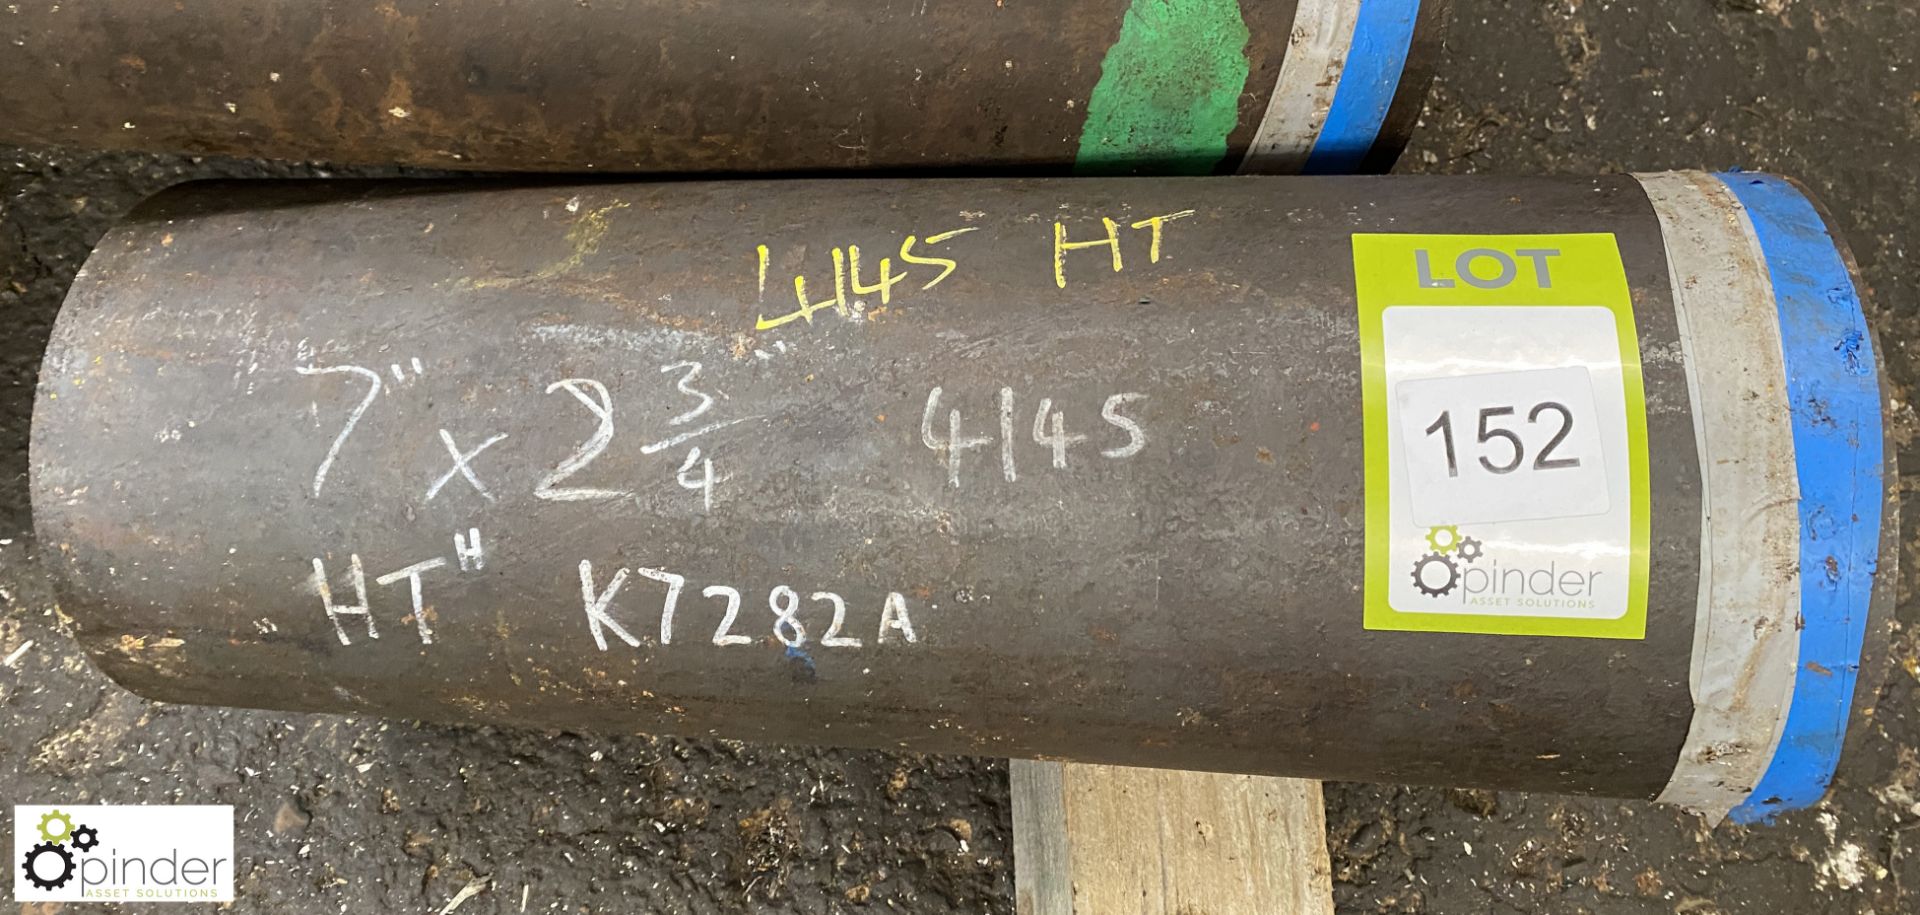 K72824 Tube, grade 4145HT, OD 7in, ID 2¾in, length 0.5m, with test certificate - Image 3 of 4